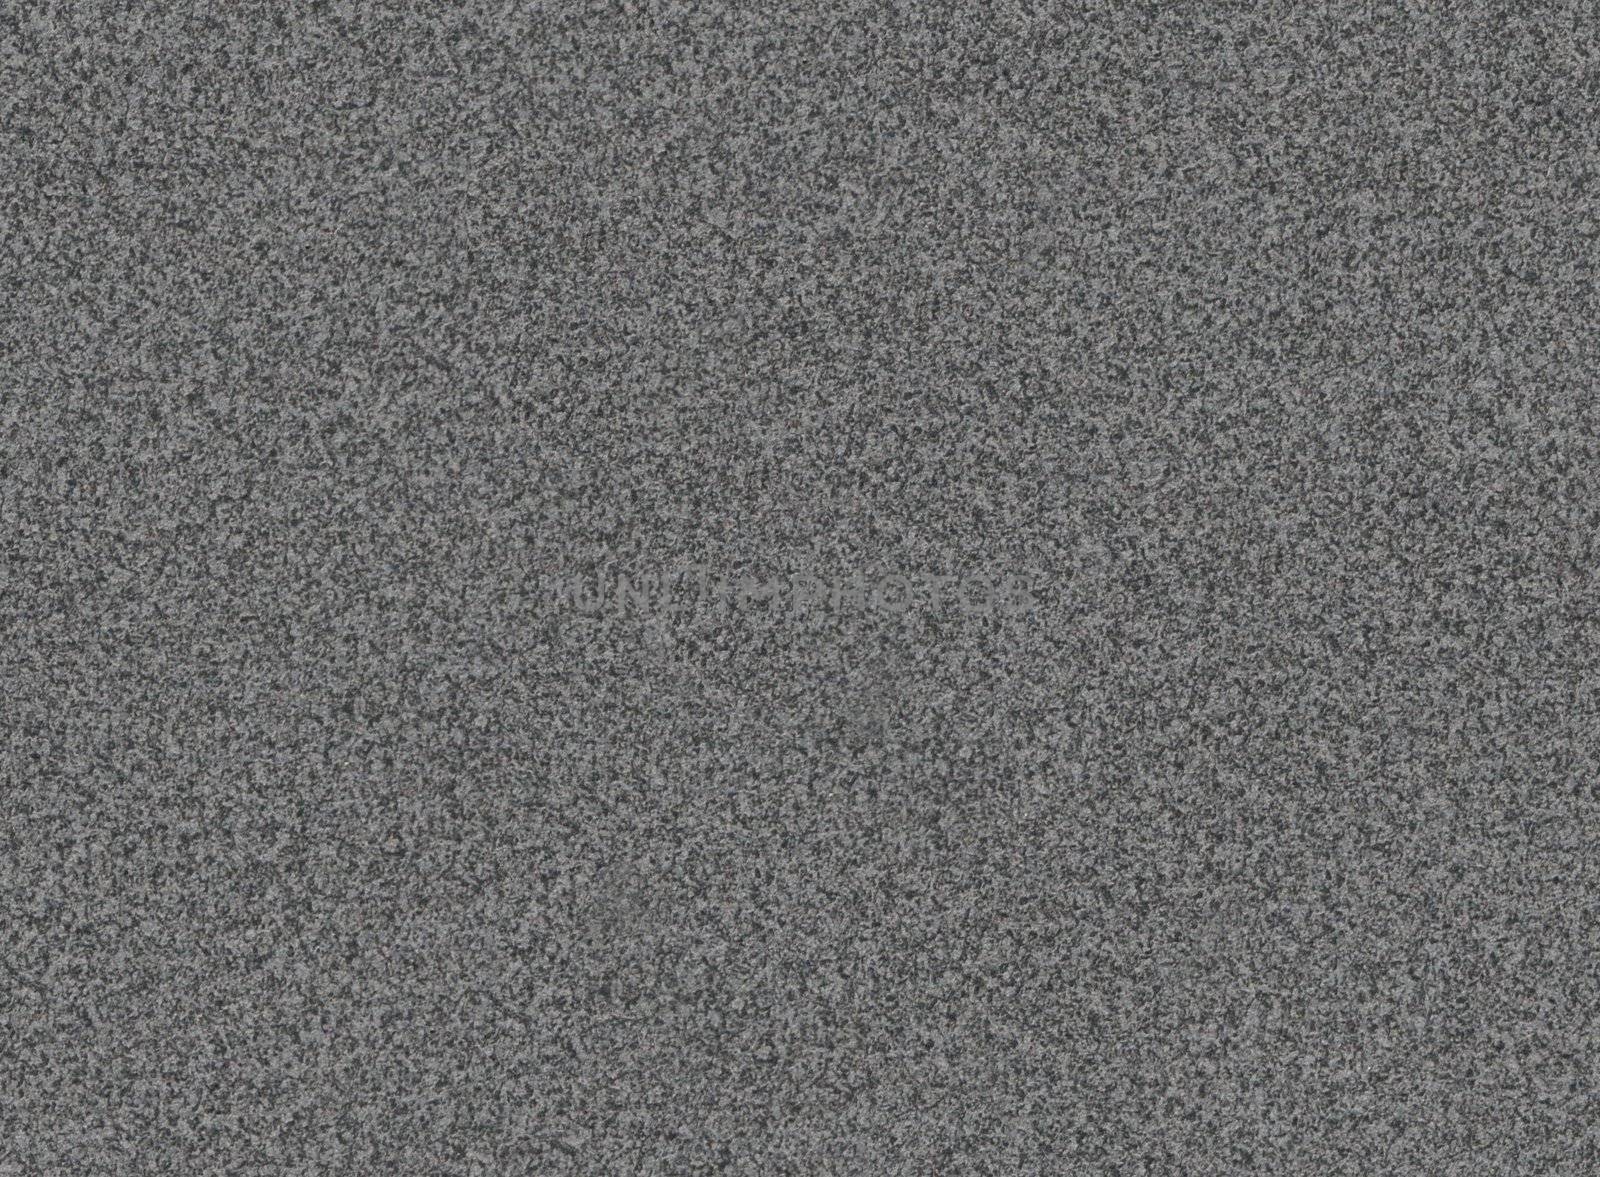 Fine granite texture that perfectly loop horizontaly and vertically